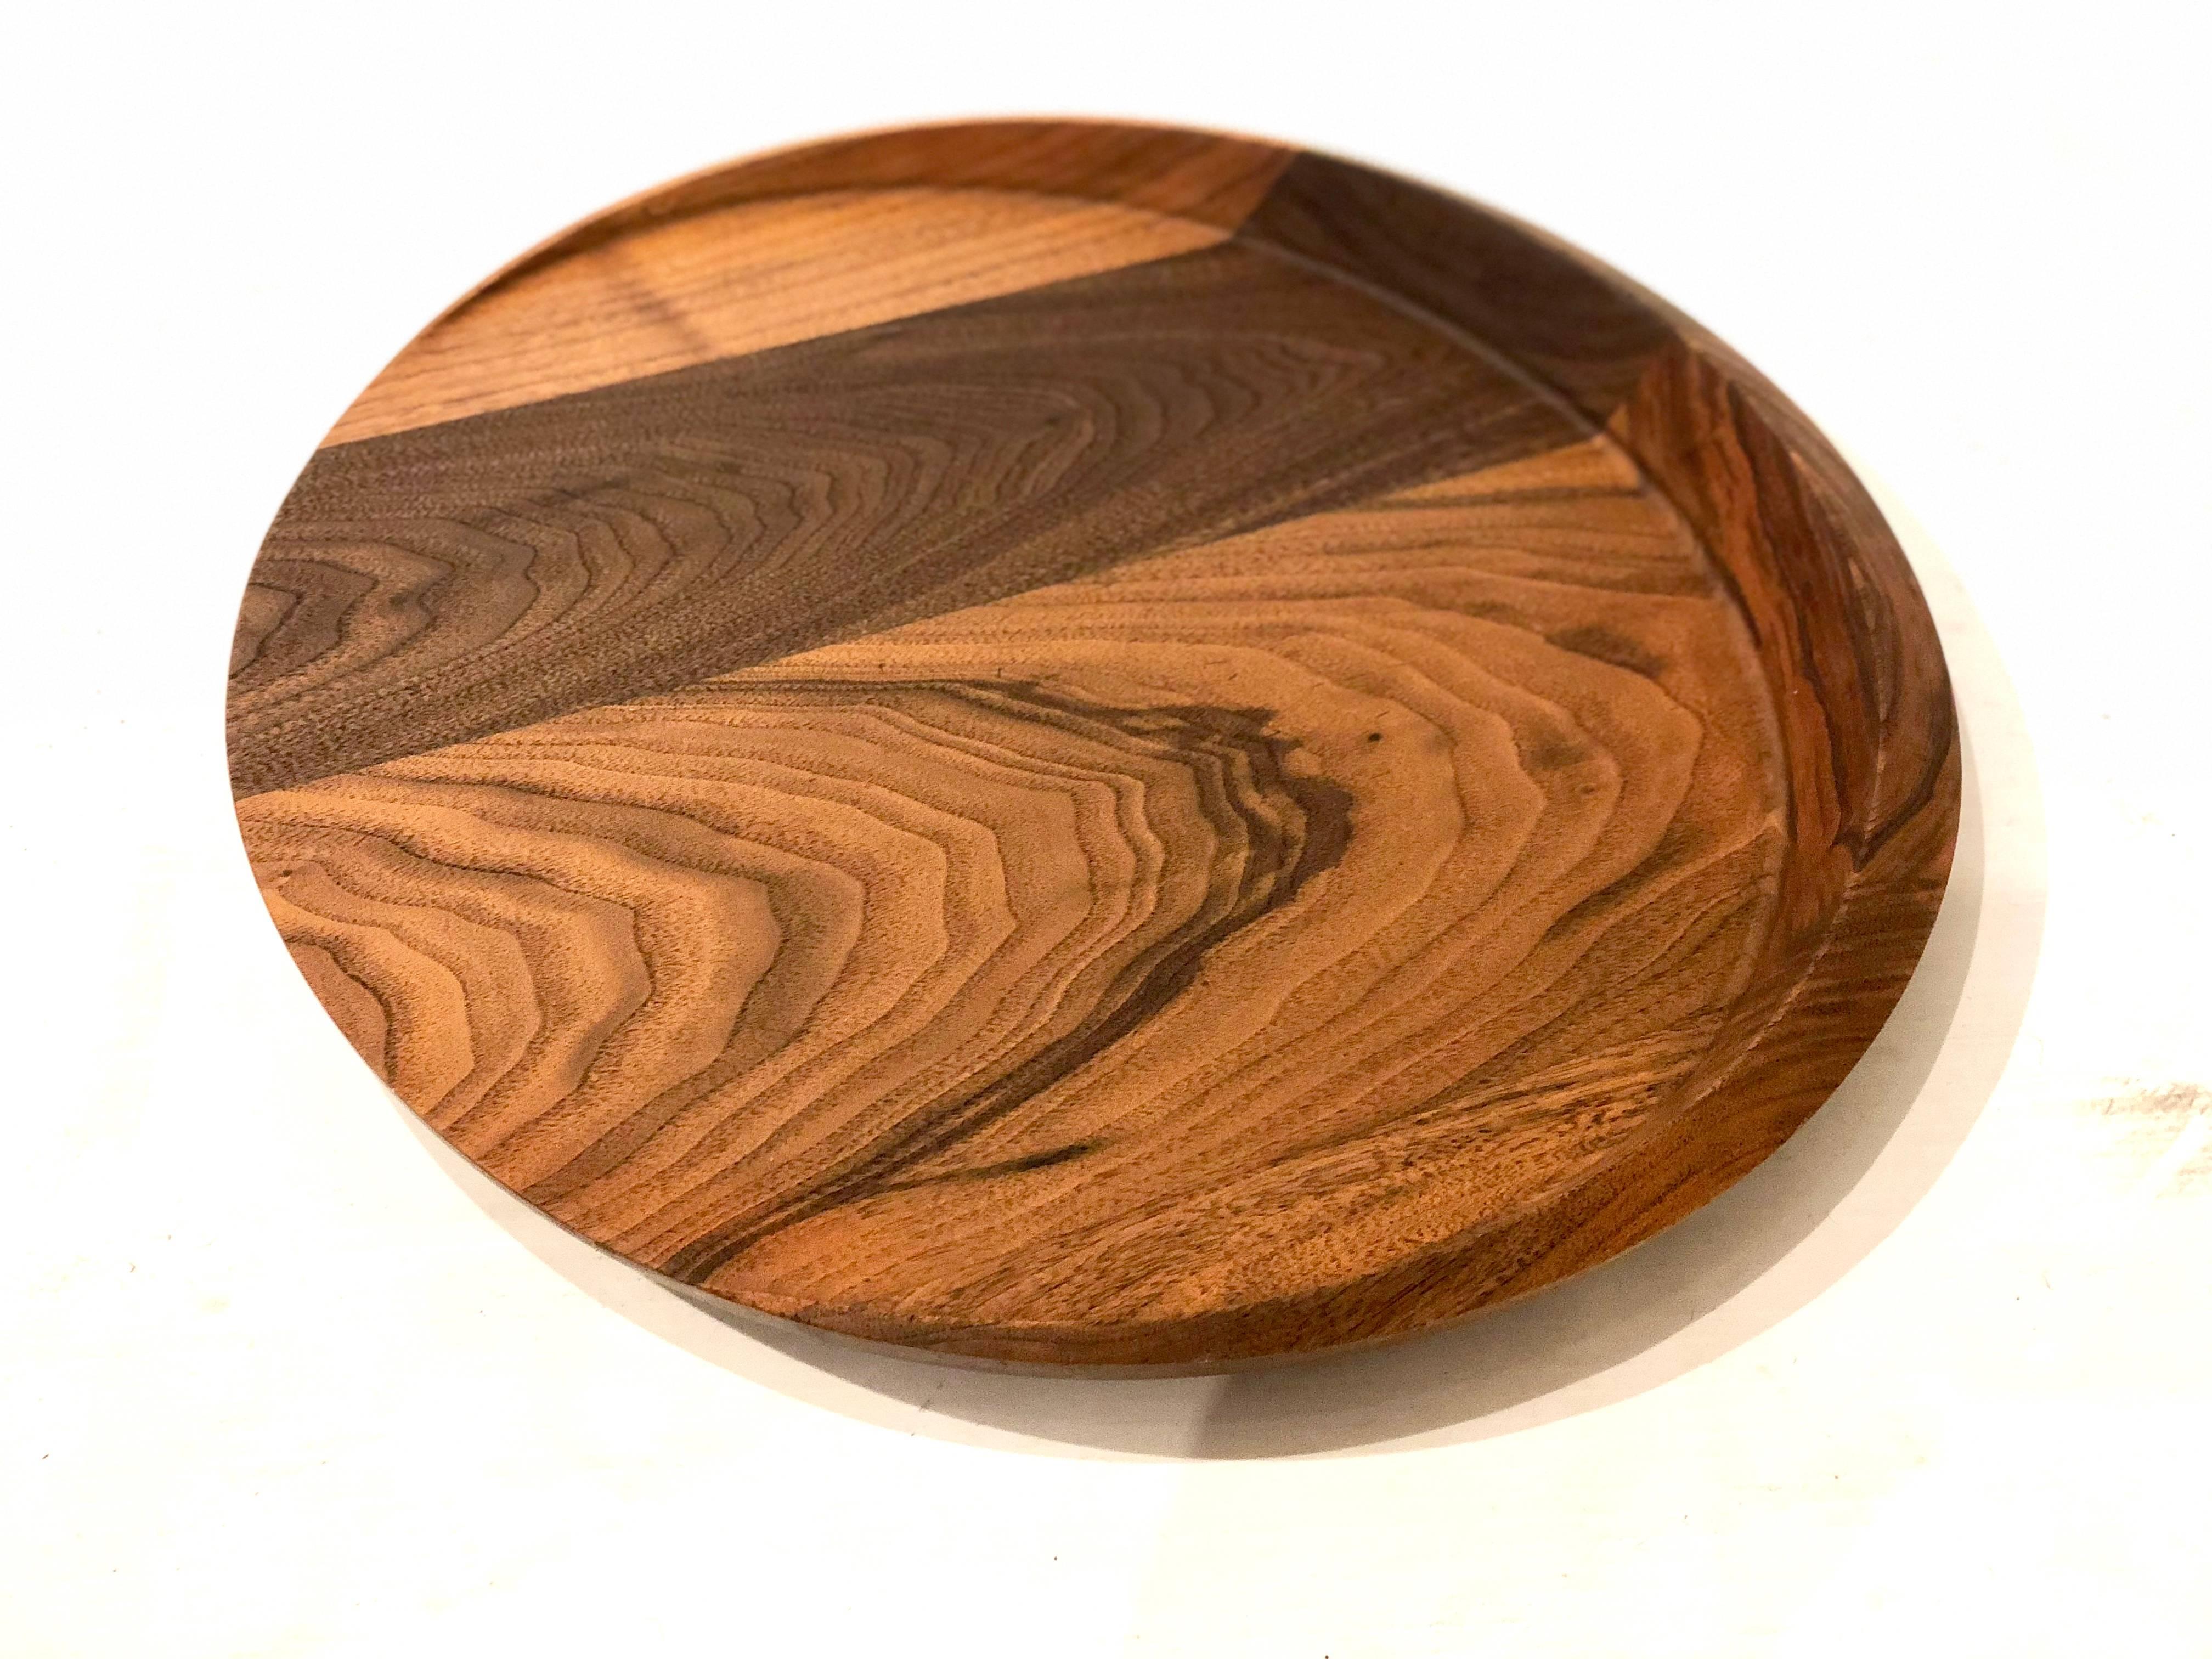 Beautiful solid walnut slanted round tray, circa 1980s designed by Richard Hudson. Freshly refinished in great condition beautiful grain.